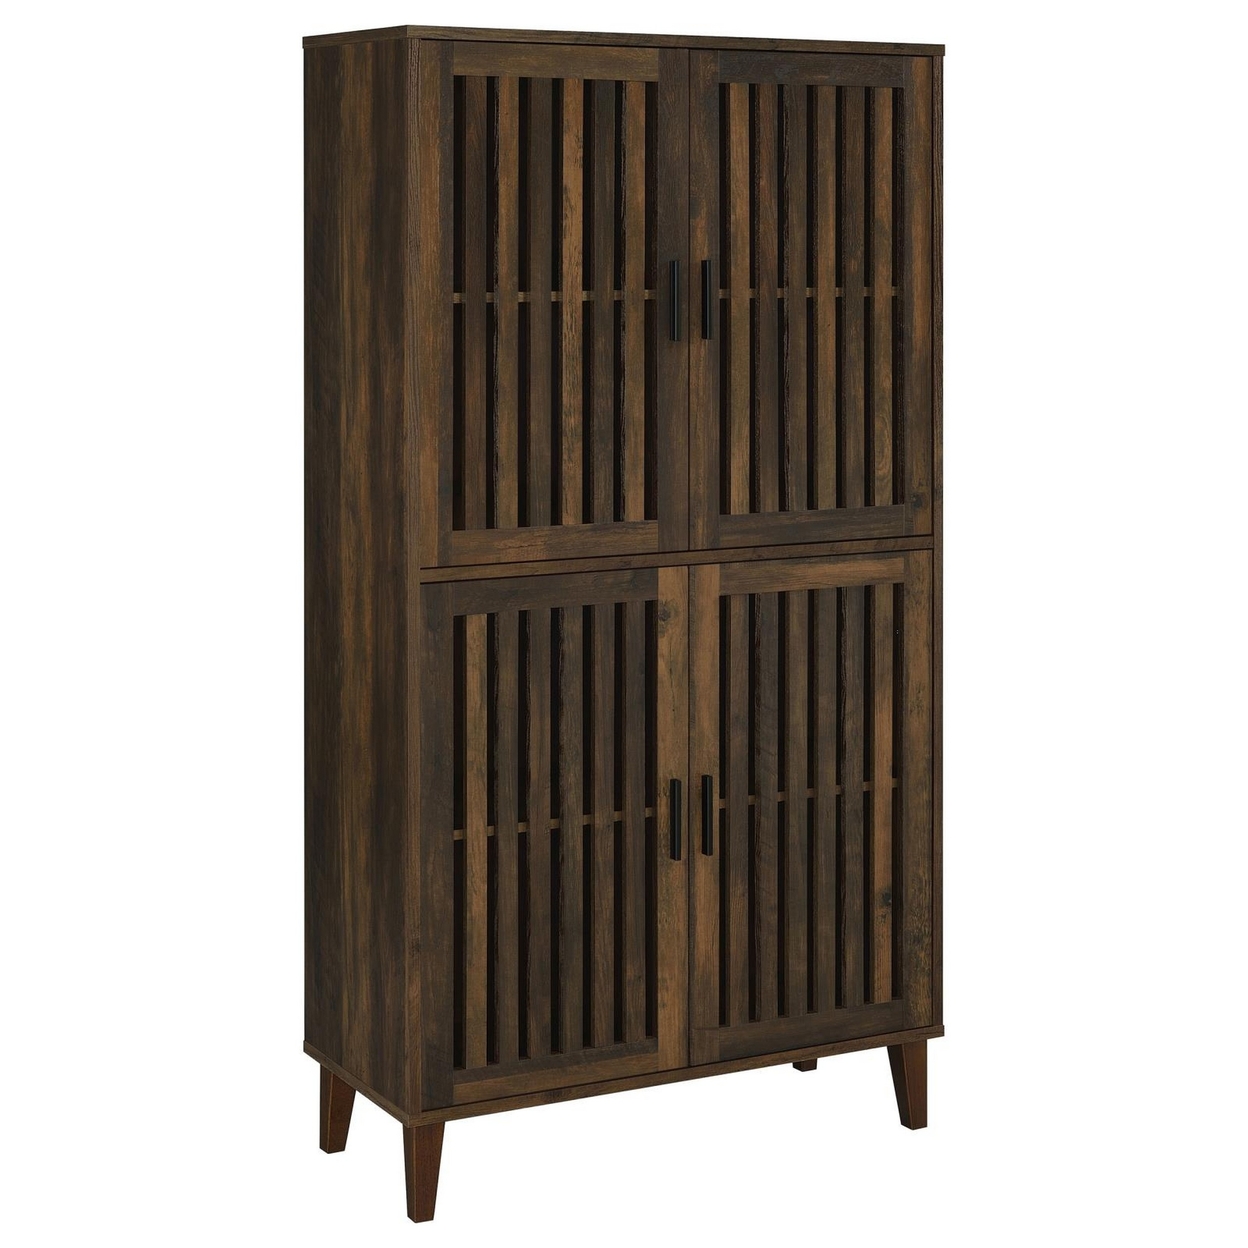 69 Inch Tall Accent Cabinet, Vertical Slatted Design, Brown And Black -Saltoro Sherpi